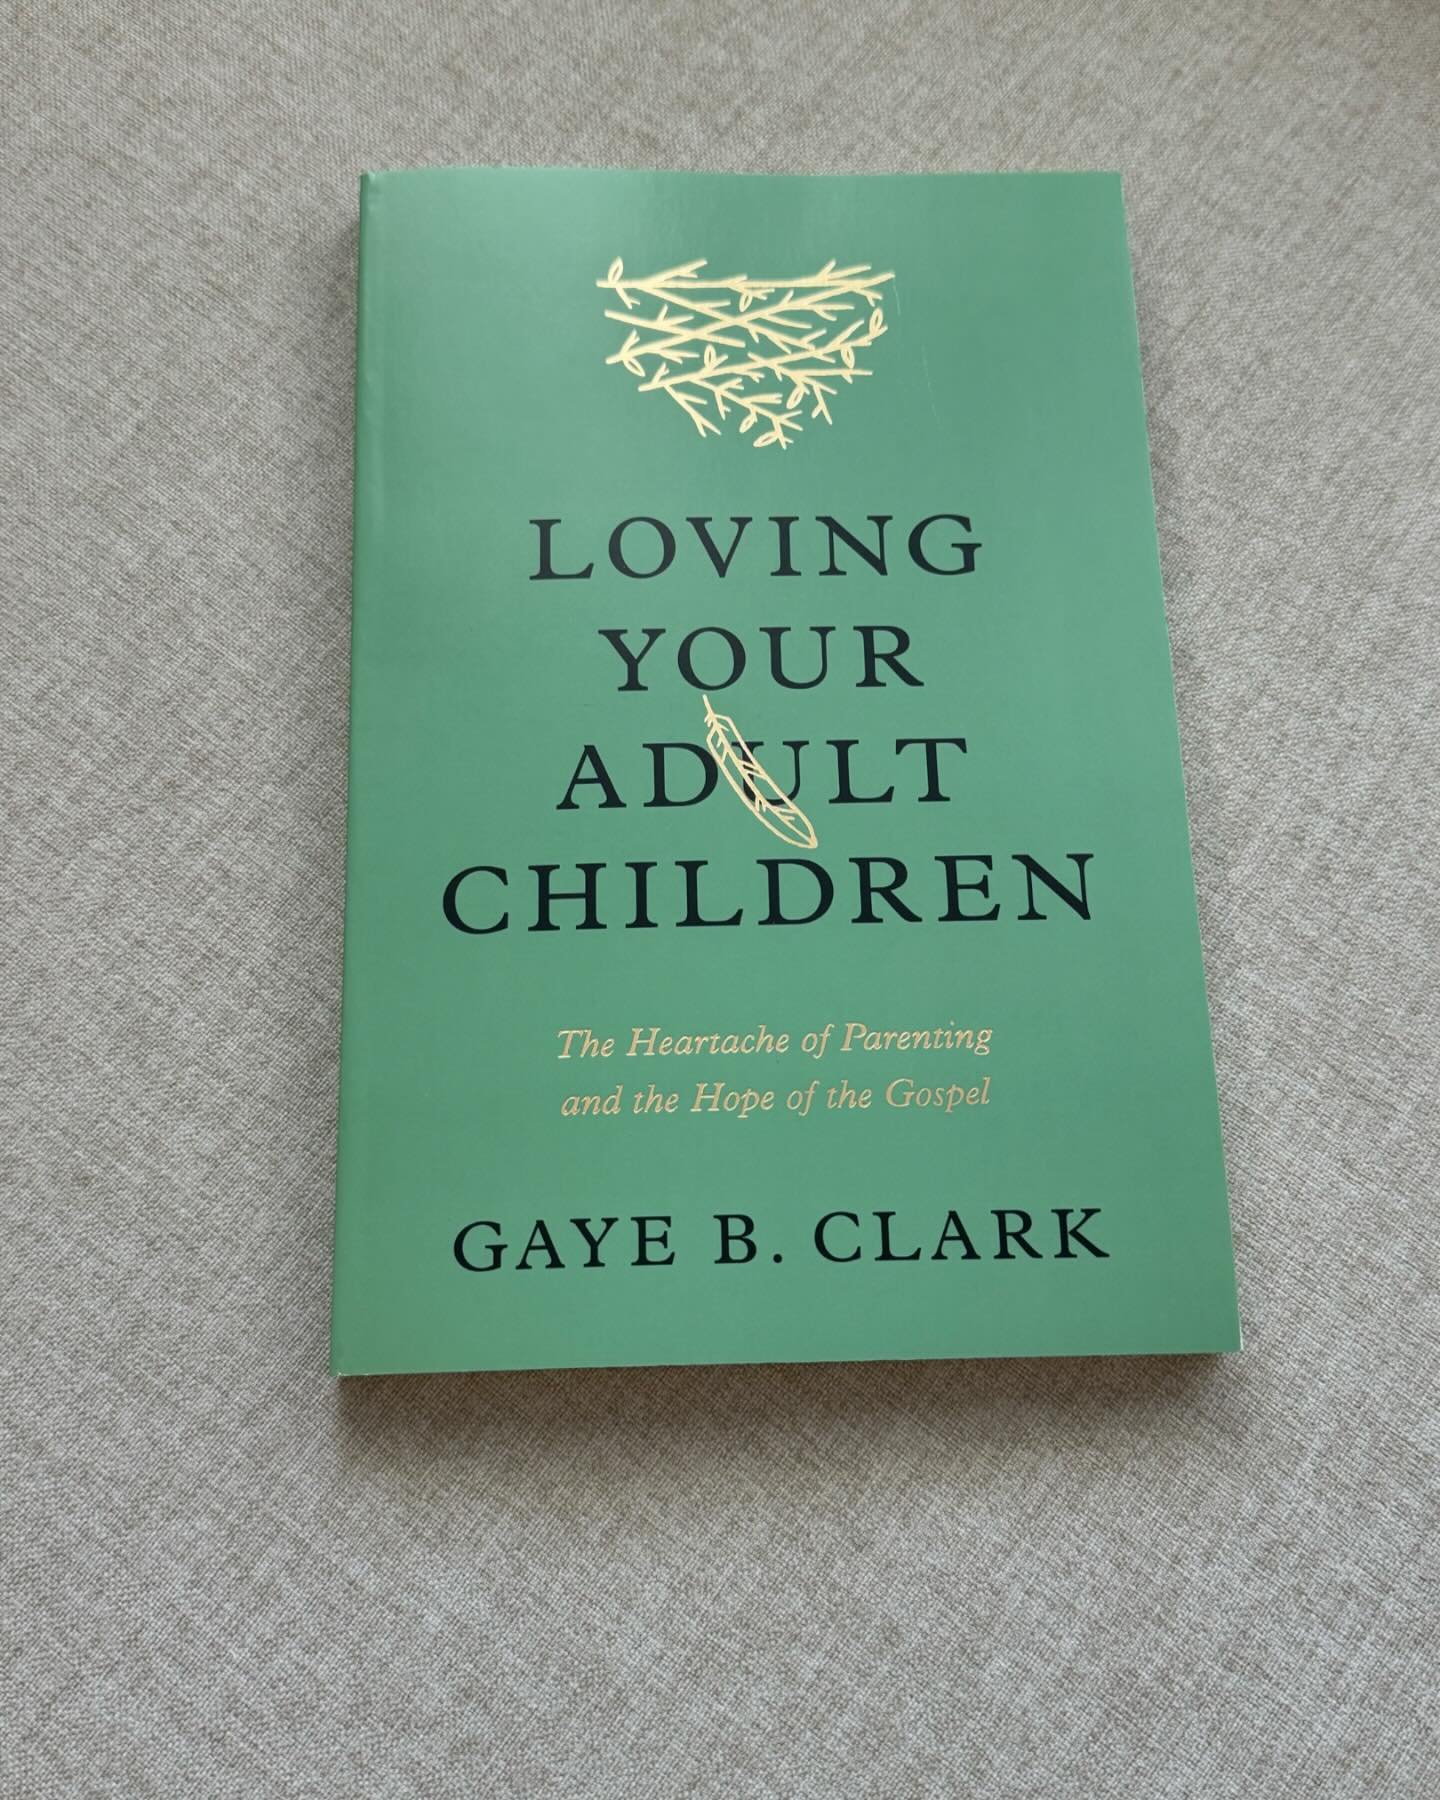 Congrats to my friend, @gayebclark on the release of her book! It was my joy to write this endorsement:
&ldquo;We never stop being parents, but what does parenting look like when our children are grown? Gaye Clark&rsquo;s book, Loving Your Adult Chil